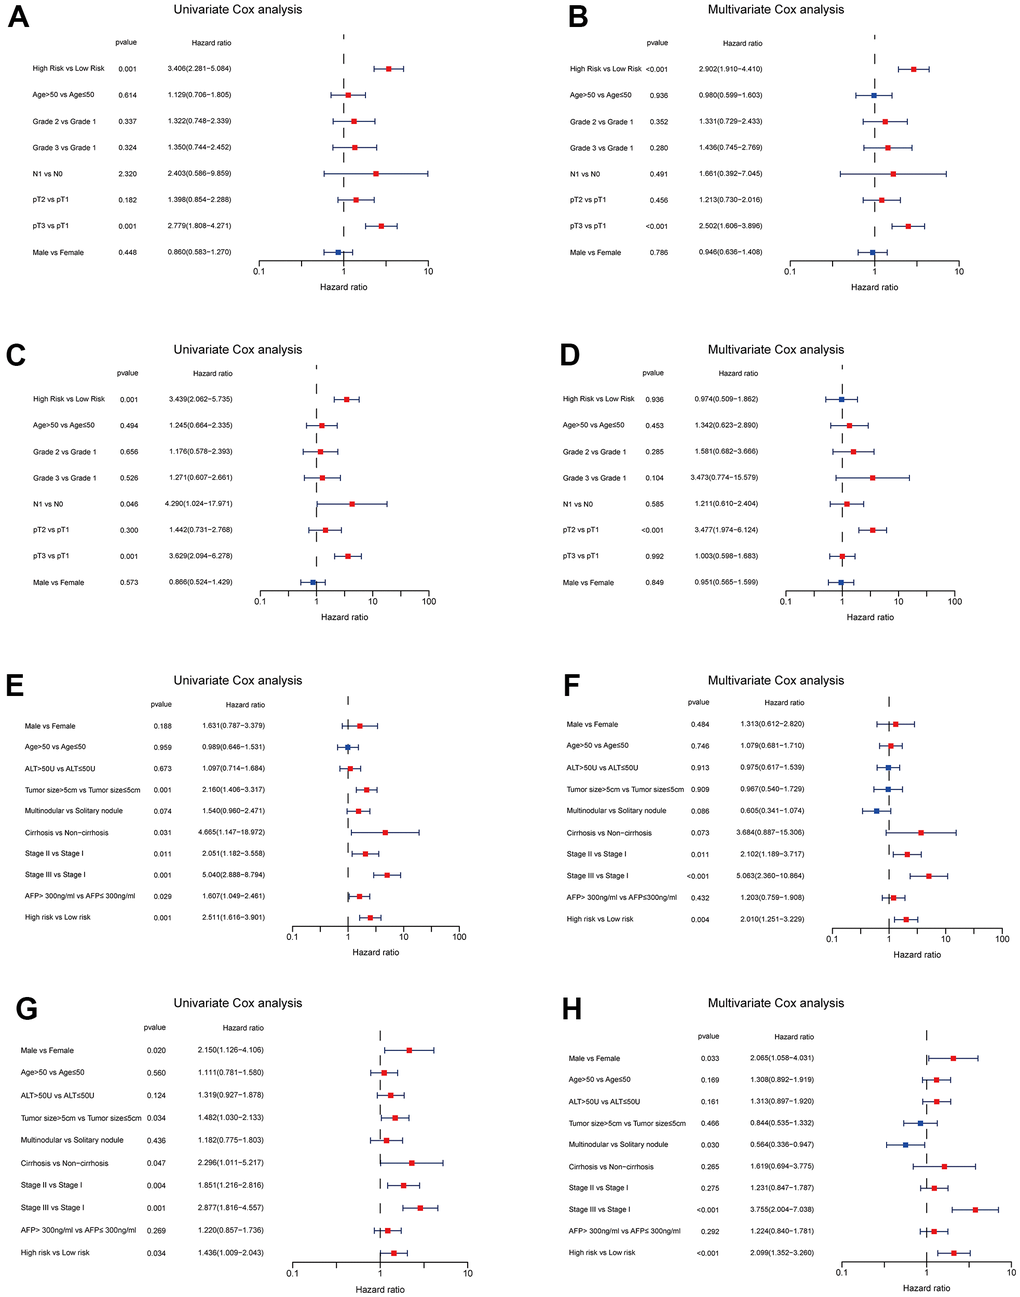 Independent prognosis analyses of TRPGs risk model in TCGA and GES14520 HCC cohorts. (A, B) Univariate and Multivariate Cox regression of risk score based on OS in TCGA HCC cohort. (C, D) Univariate and Multivariate Cox regression of risk score based on RFS in TCGA HCC cohort. (E, F) Univariate and Multivariate Cox regression of risk score based on OS in GSE14520 HCC cohort. (G, H) Univariate and Multivariate Cox regression of risk score based on RFS in GSE14520 HCC cohort. TRPGs, tryptophan metabolism-related genes; HCC, hepatocellular carcinoma; TCGA, The Cancer Genome Atlas; OS, overall survival; DSS, disease-specific survival; RFS, relapse-free survival.